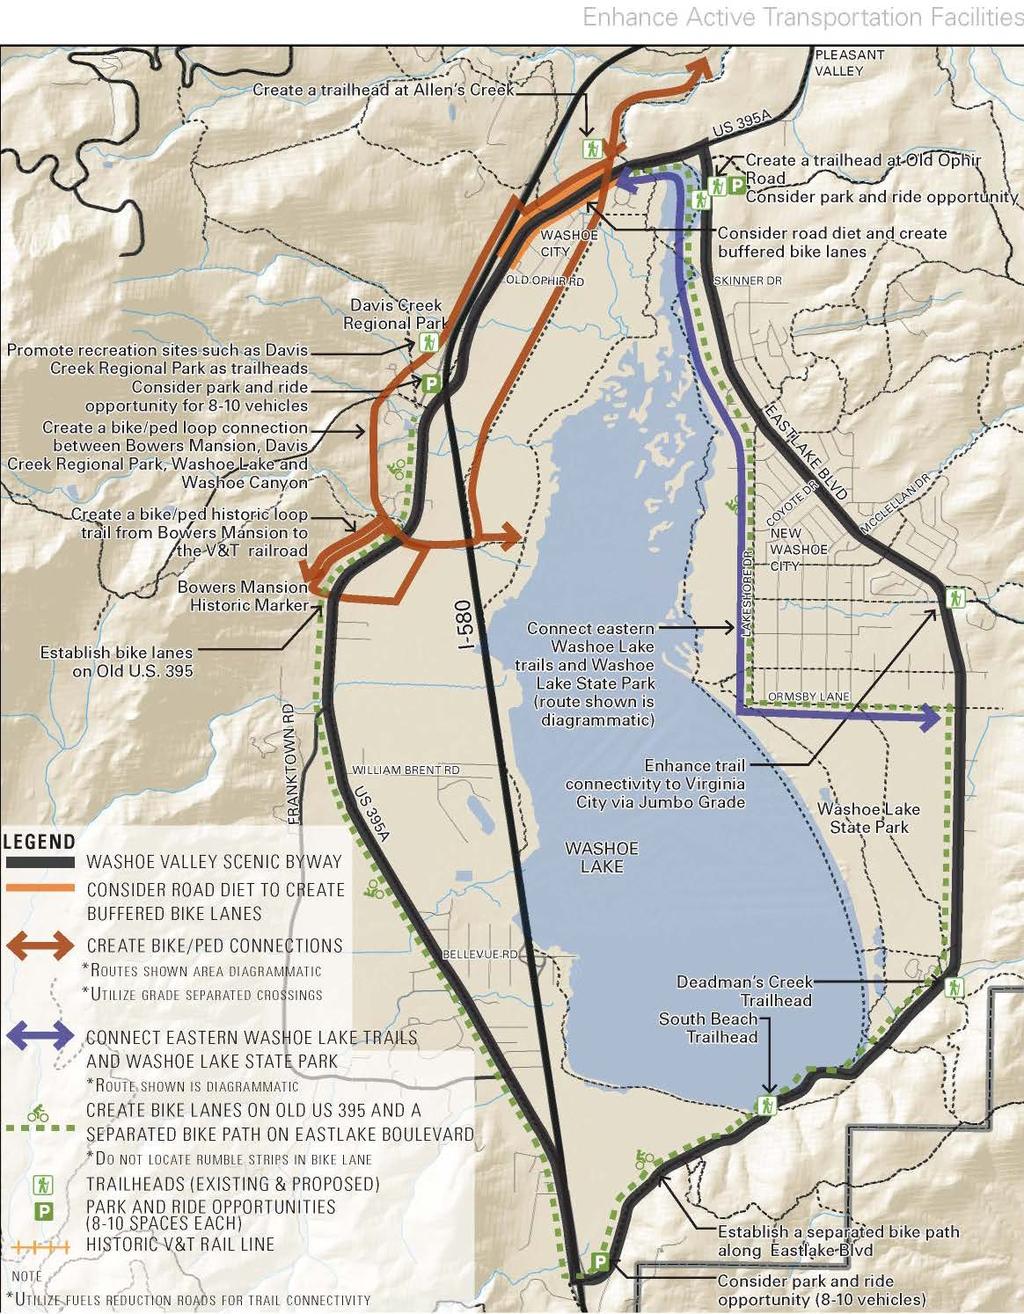 WASHOE VALLEY BYWAY RECOMMENDATIONS ENHANCE ACTIVE TRANSPORTATION FACILITIES Enhance Bike and Pedestrian Facilities Bike lanes along old U.S. 395 Bike lanes or separated path on Eastlake Road diet